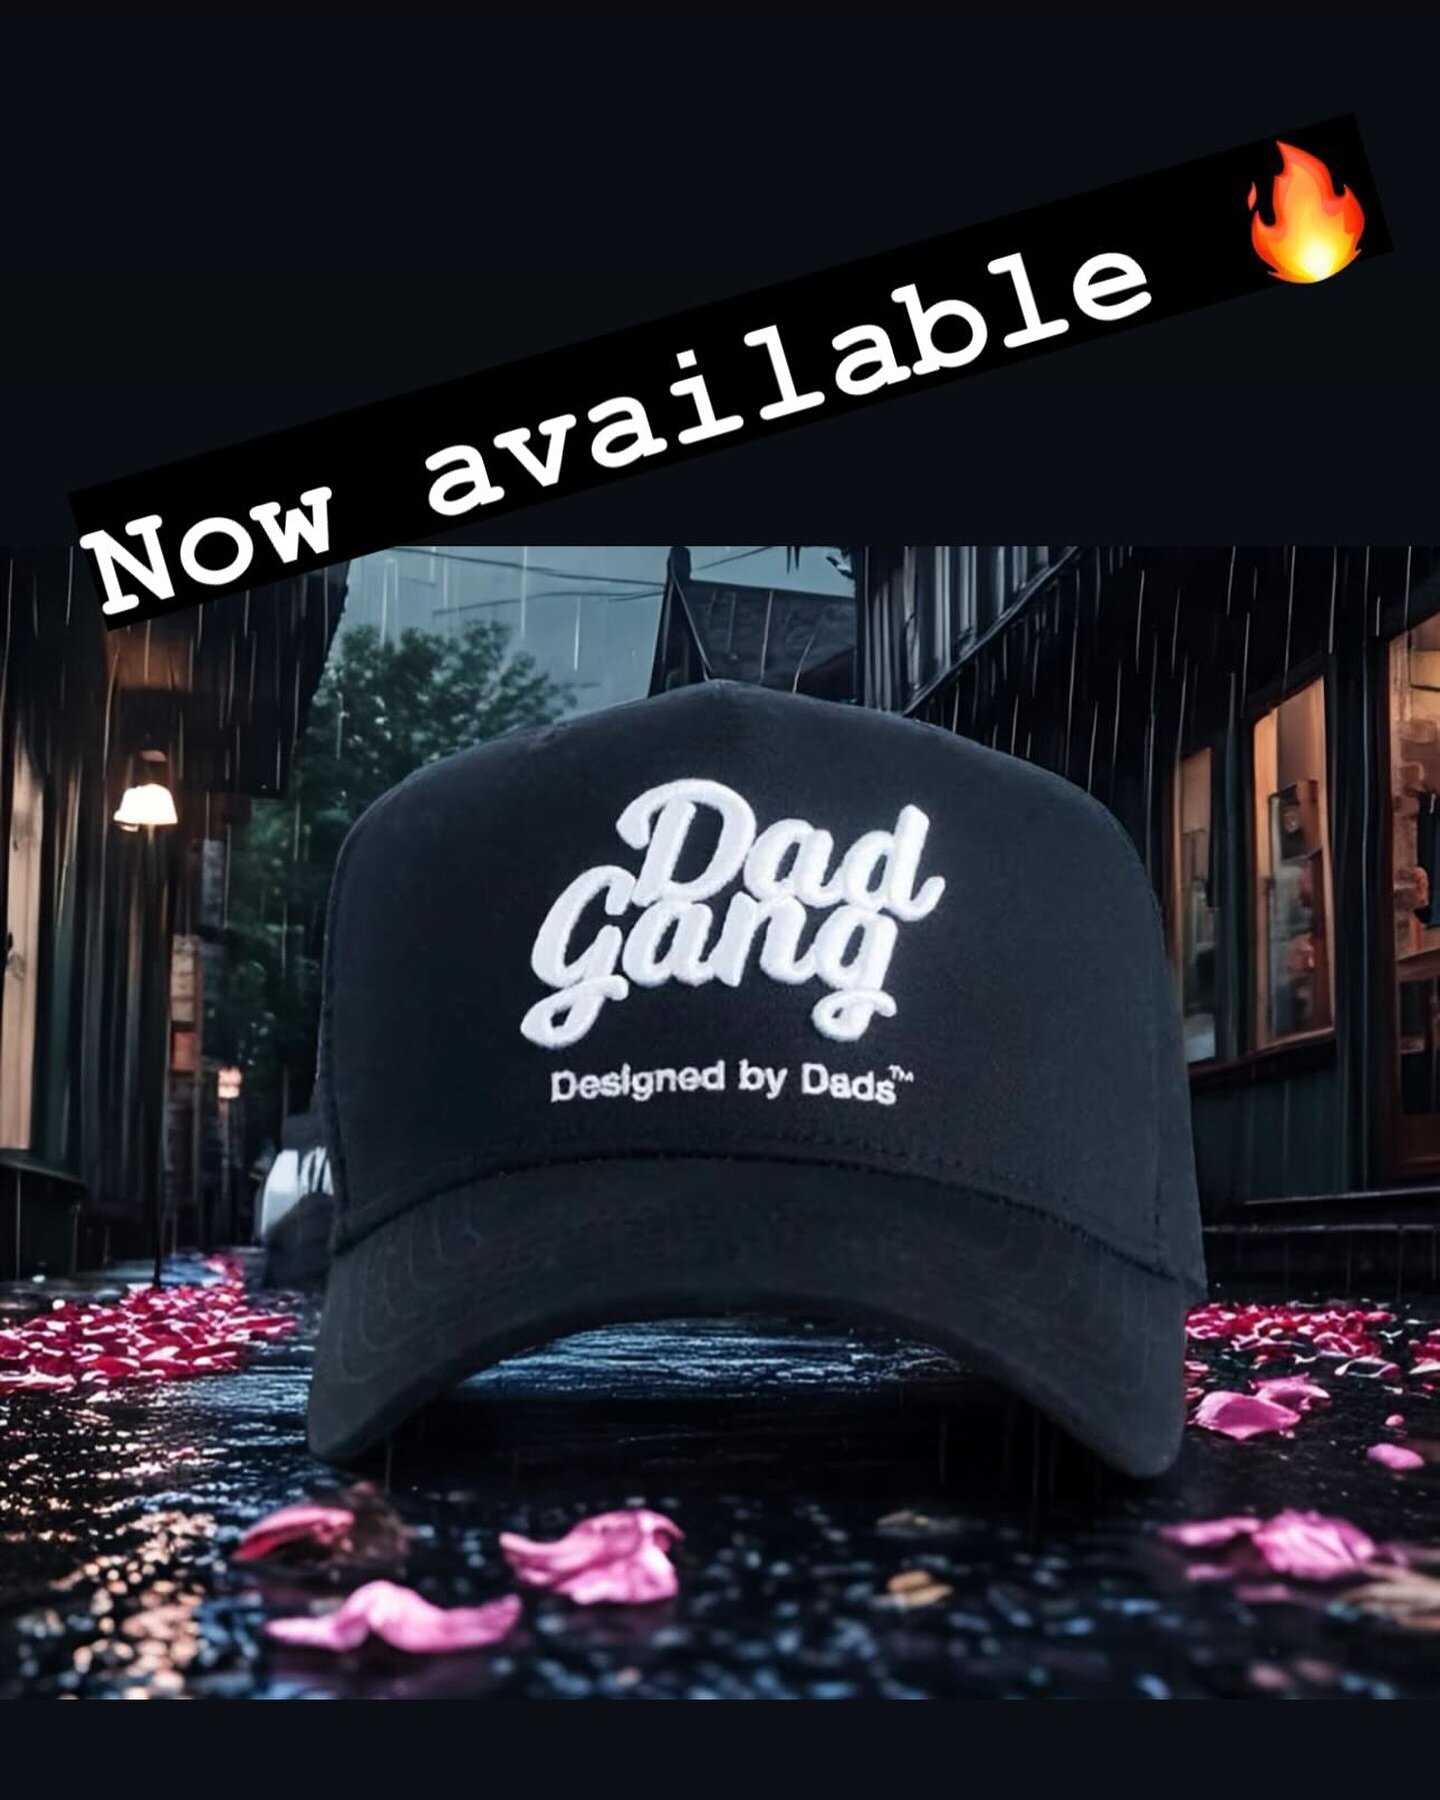 Dad gang 🧢 NOW available at House of Culture Ventura🔥🔥🔥🔥

#houseofcultureventura